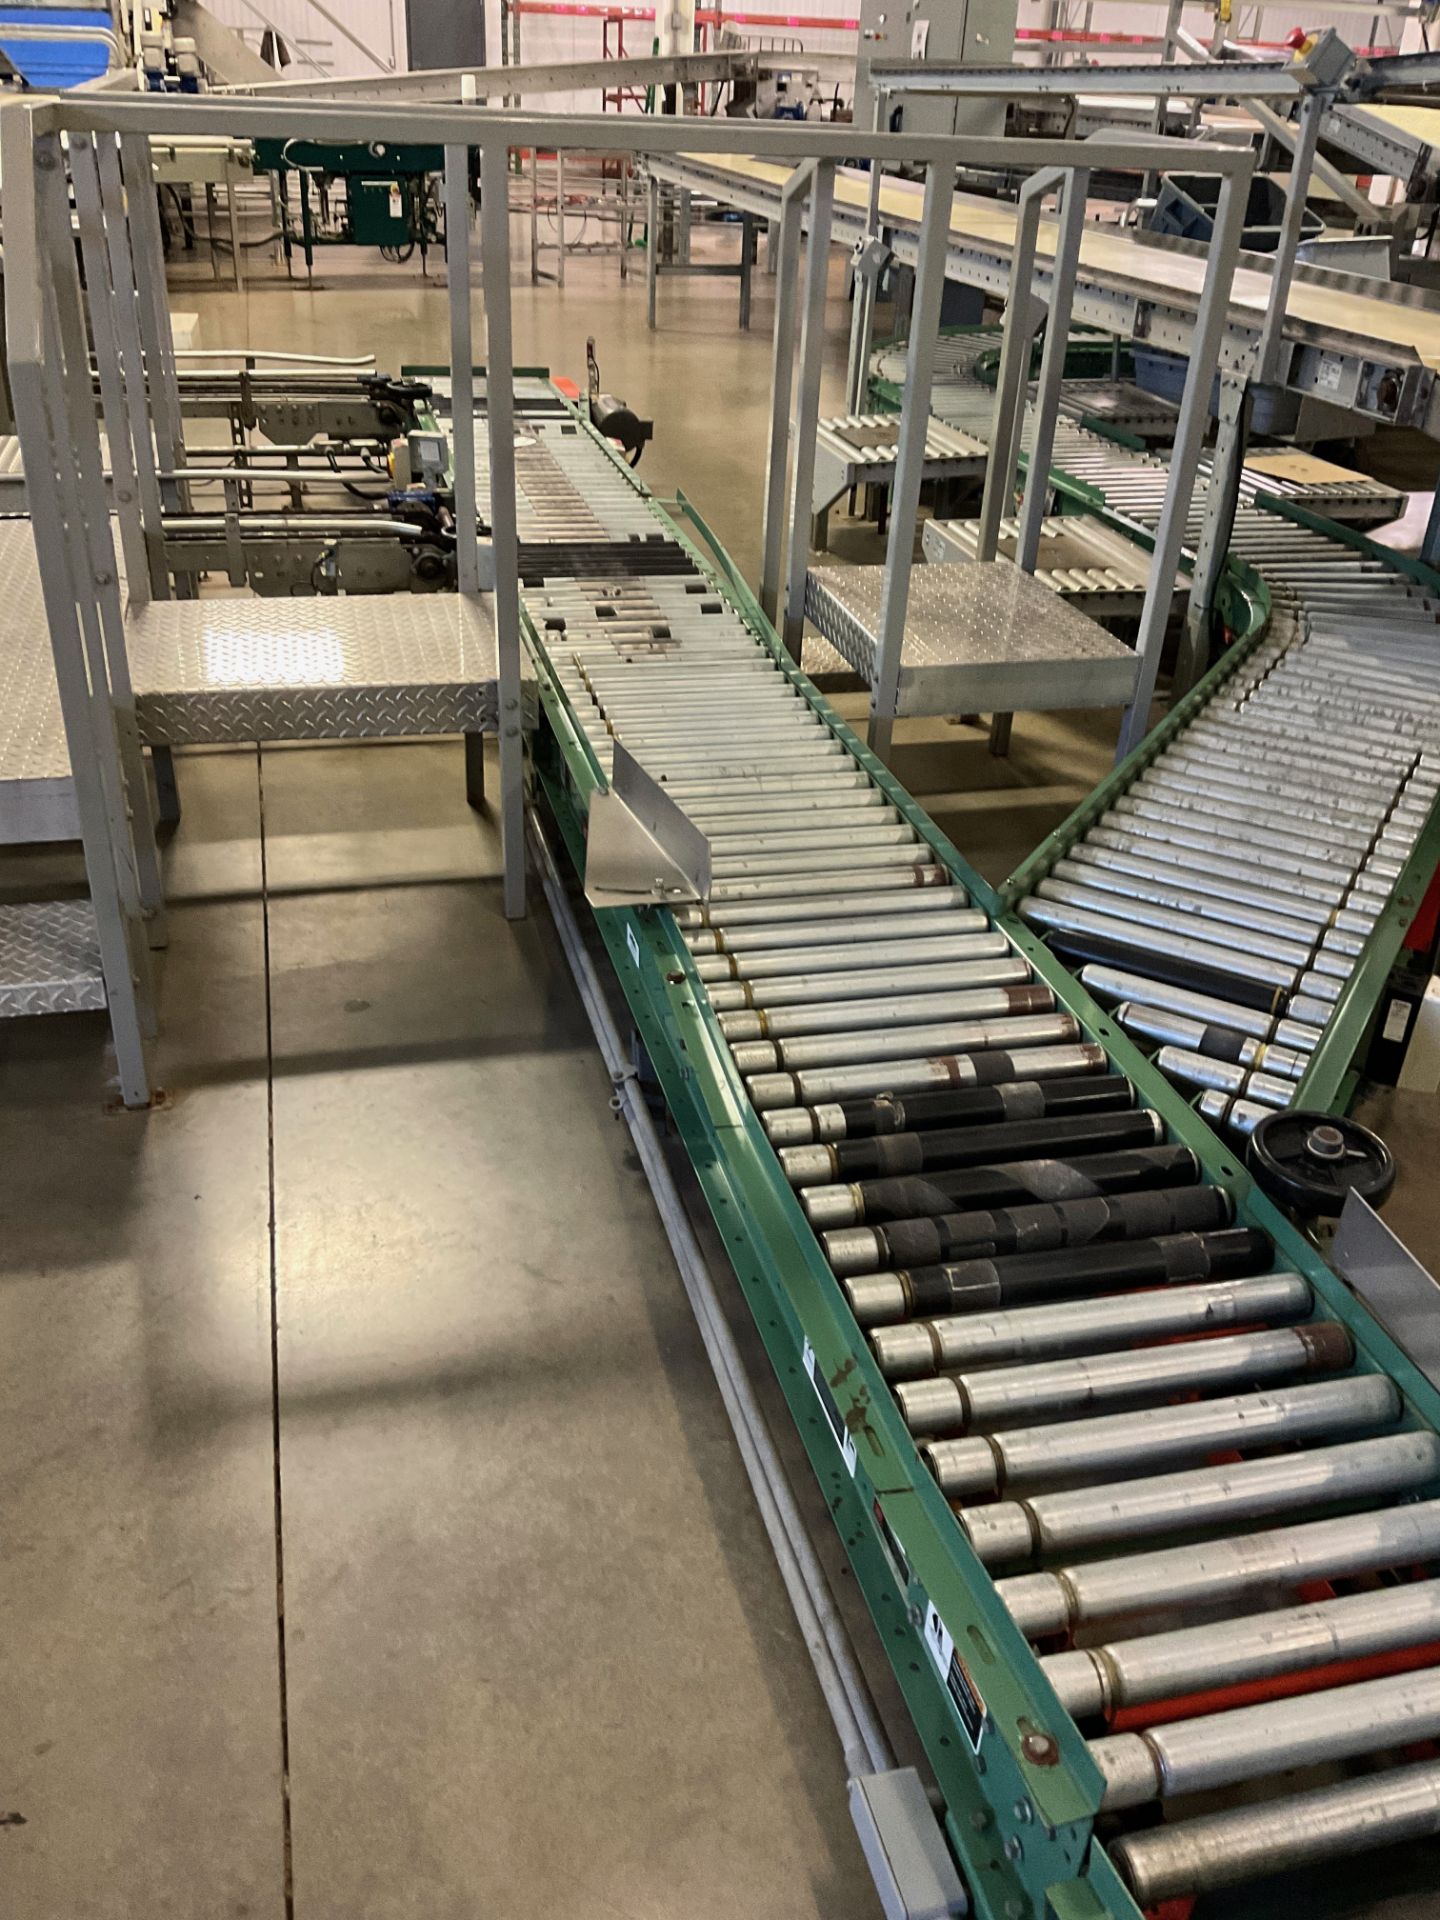 Roach Powerd Roller Conveyor Section, Approx Dims: 16in W x 18ft OAL - Subj to Bulk | Rig Fee $400